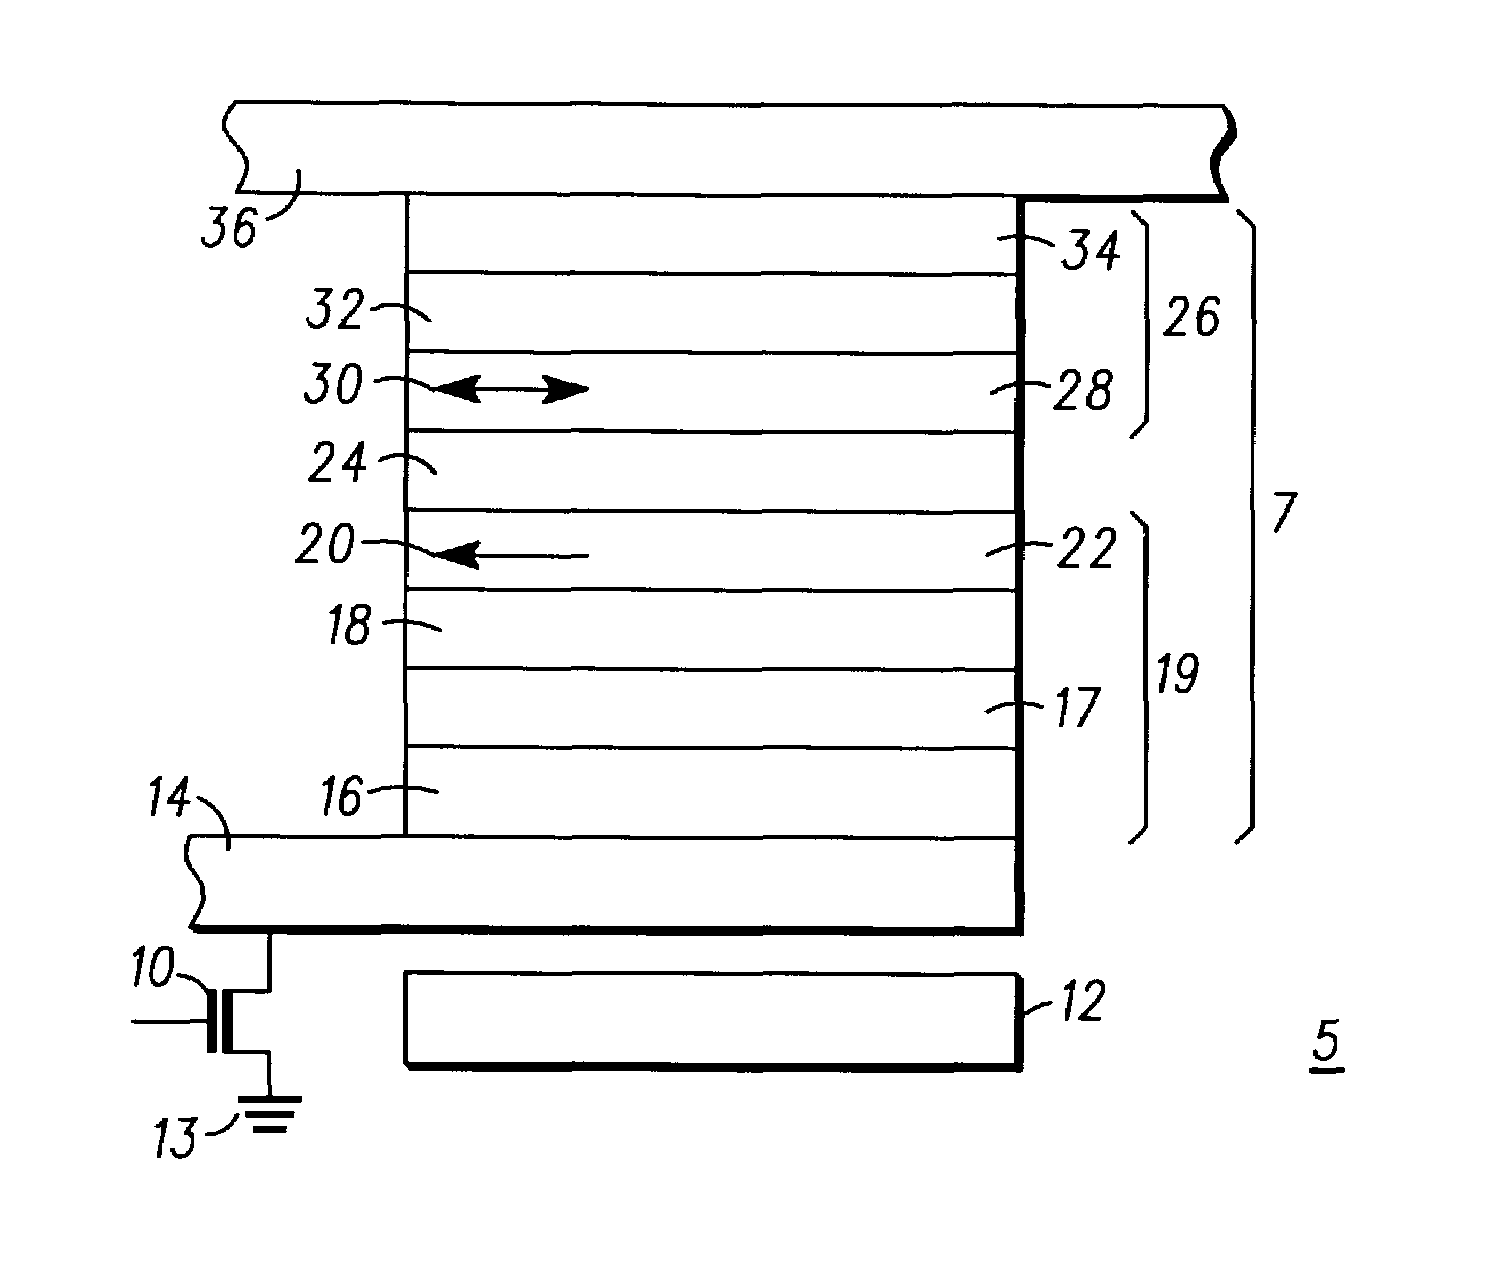 Multi-state magnetoresistance random access cell with improved memory storage density